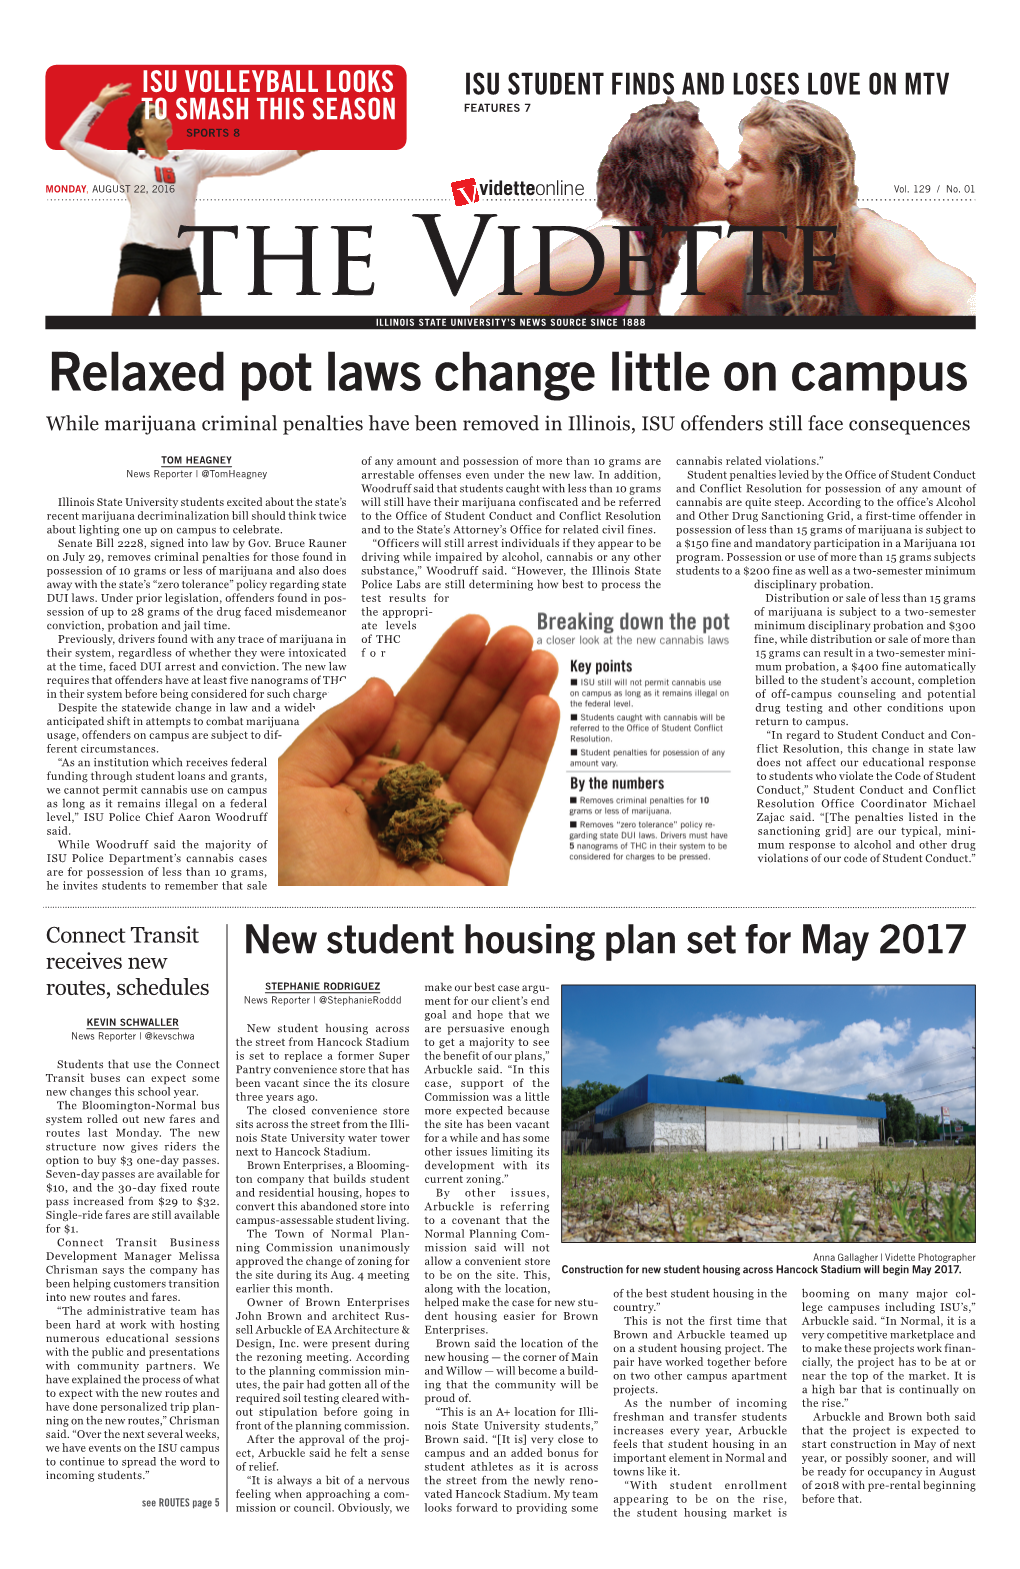 Relaxed Pot Laws Change Little on Campus While Marijuana Criminal Penalties Have Been Removed in Illinois, ISU Offenders Still Face Consequences